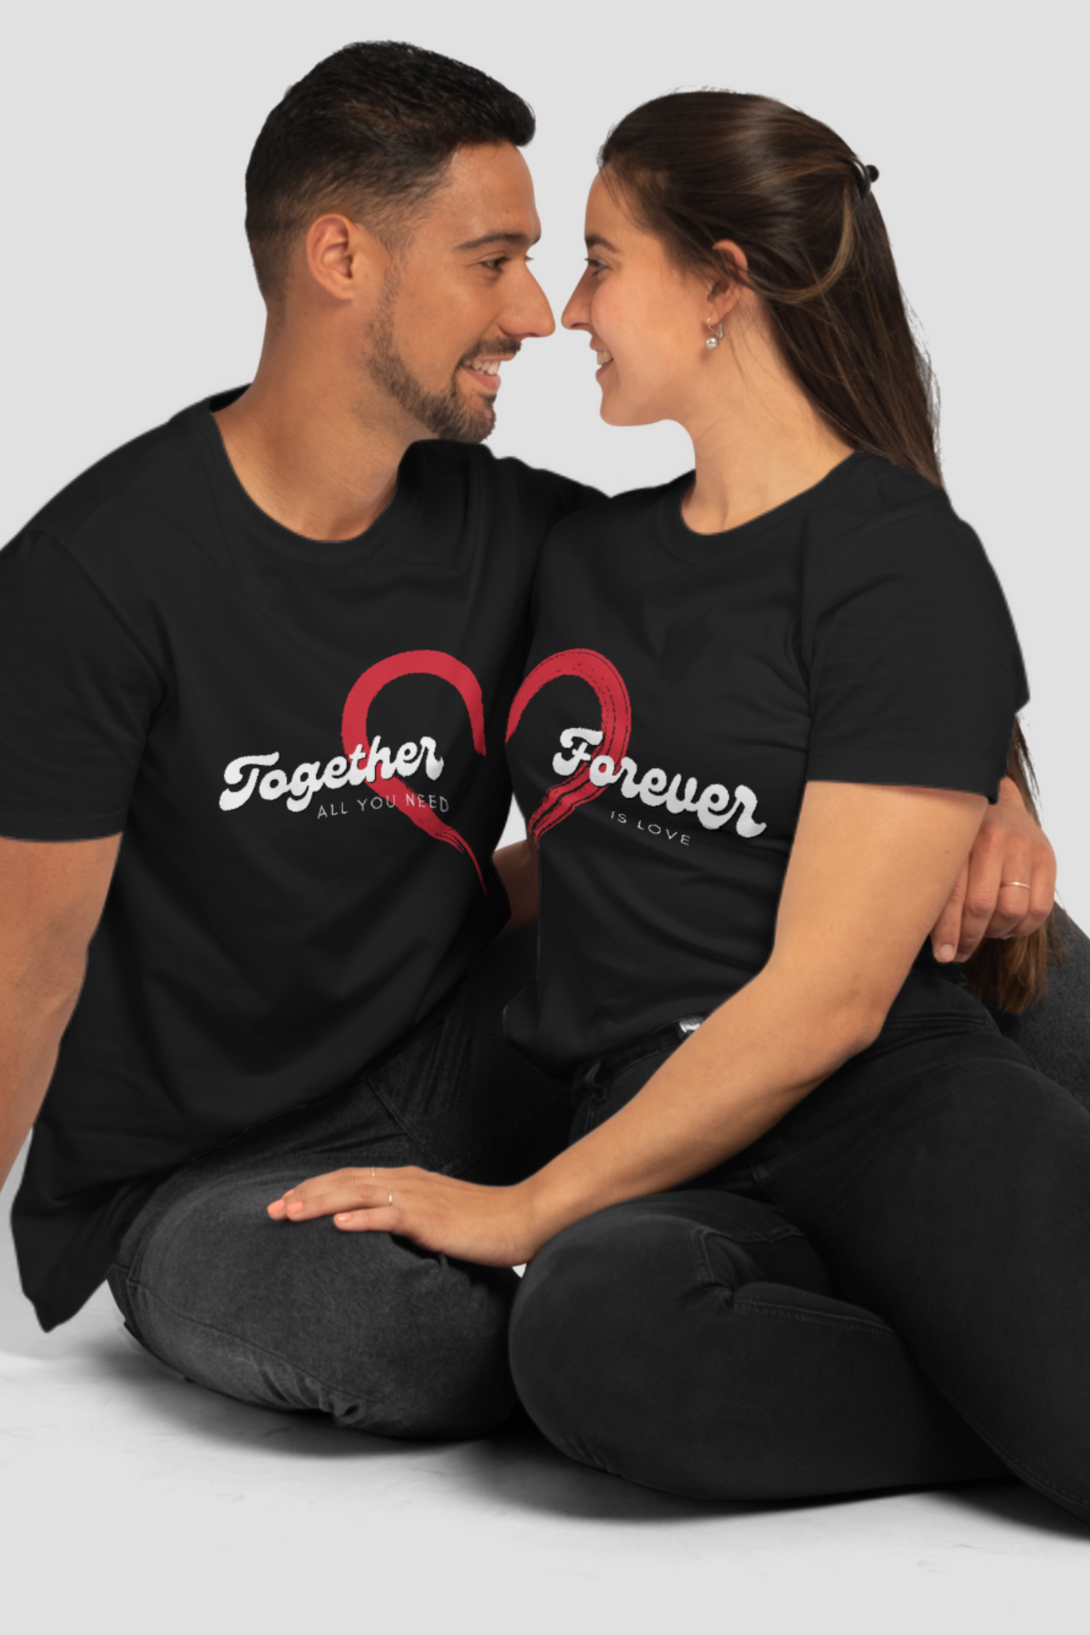 Together Forever Couple T Shirt - WowWaves - 3